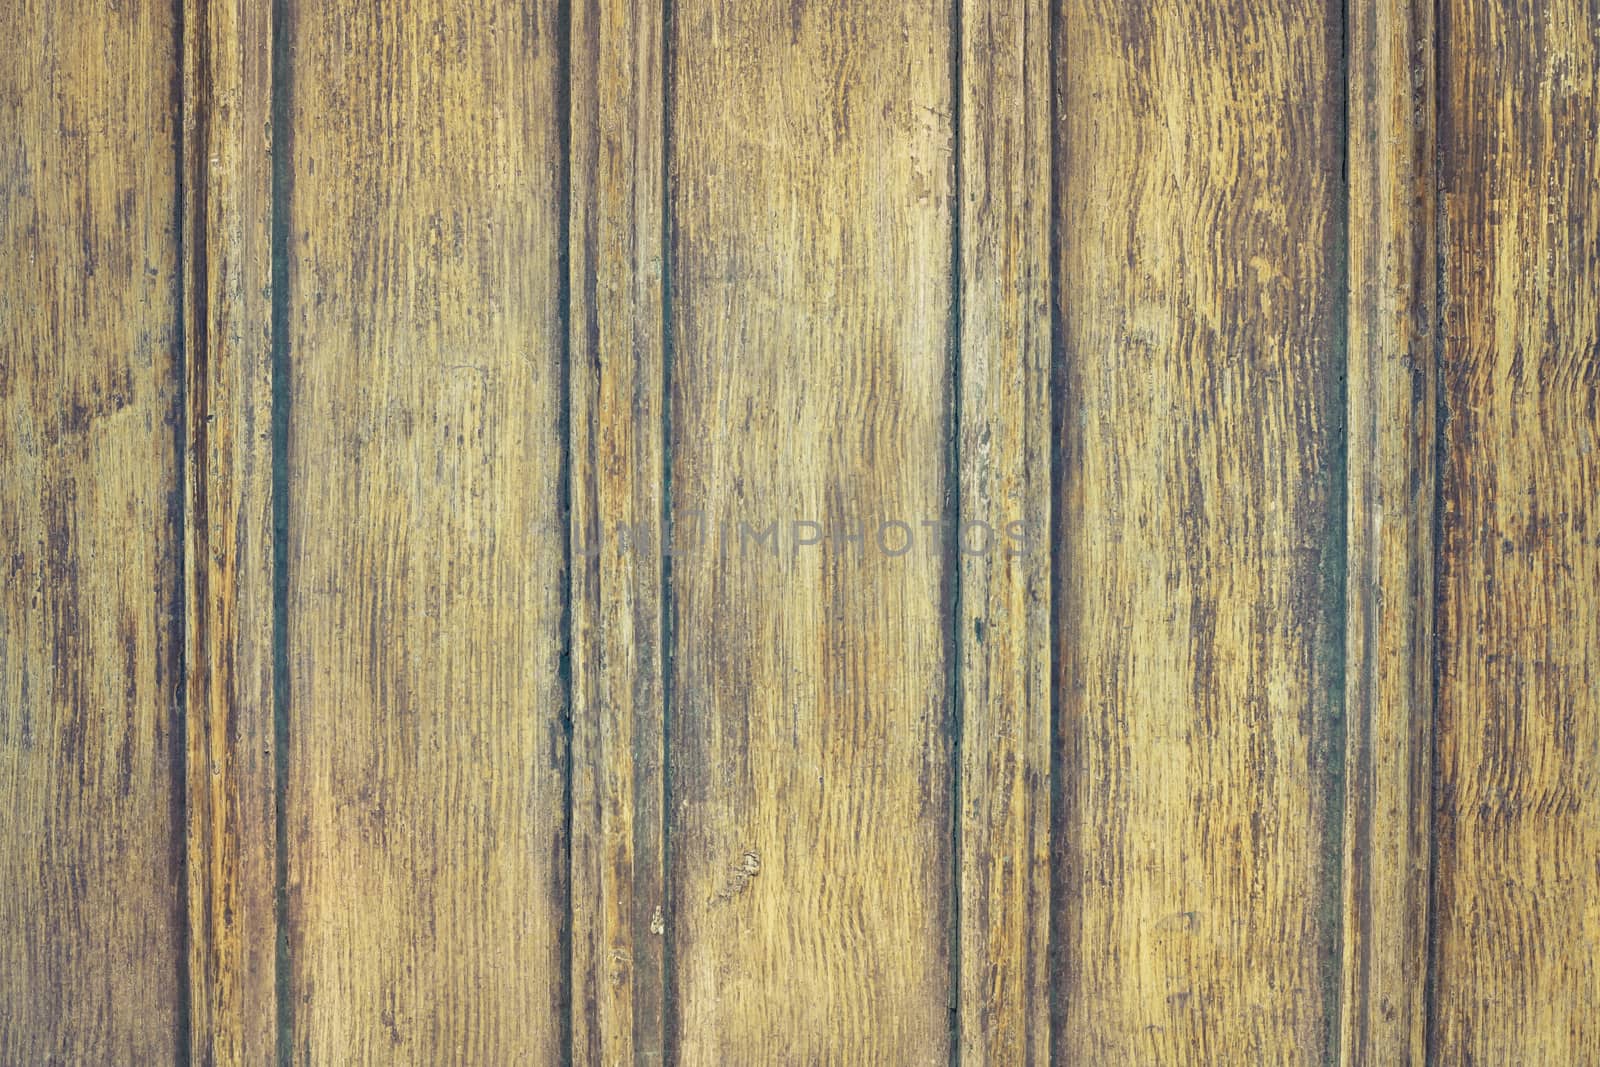 Close up of an aged wooden door as a background